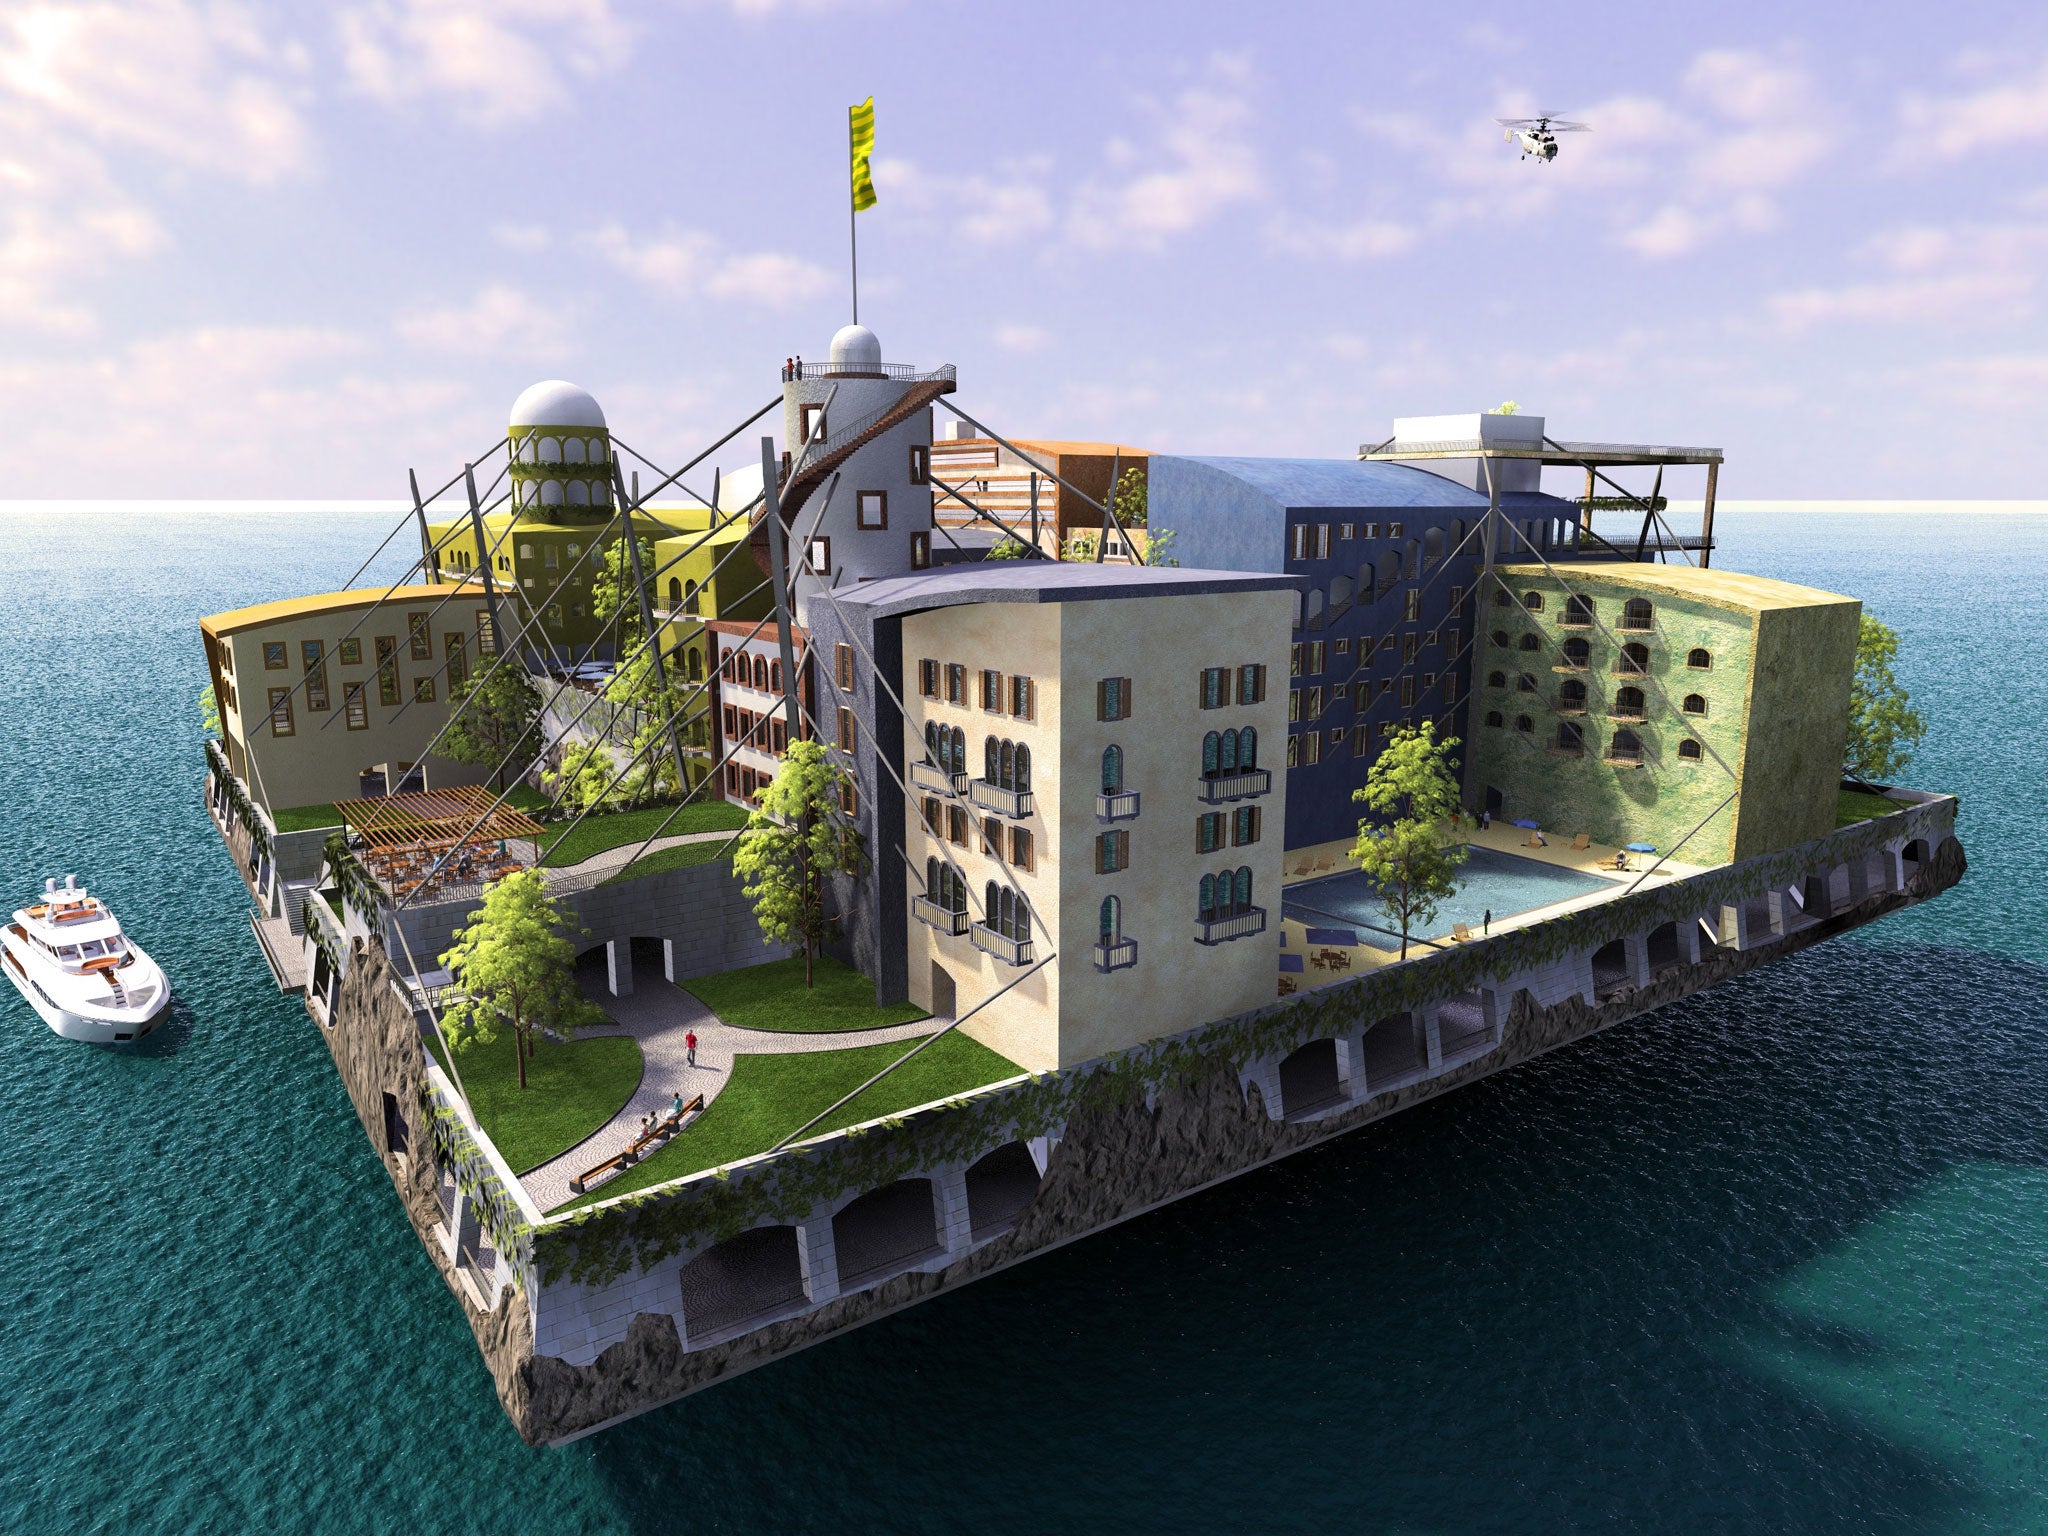 The Swimming City by Andras Gyorfi, the winning entry in a Seasteading Institute design contest